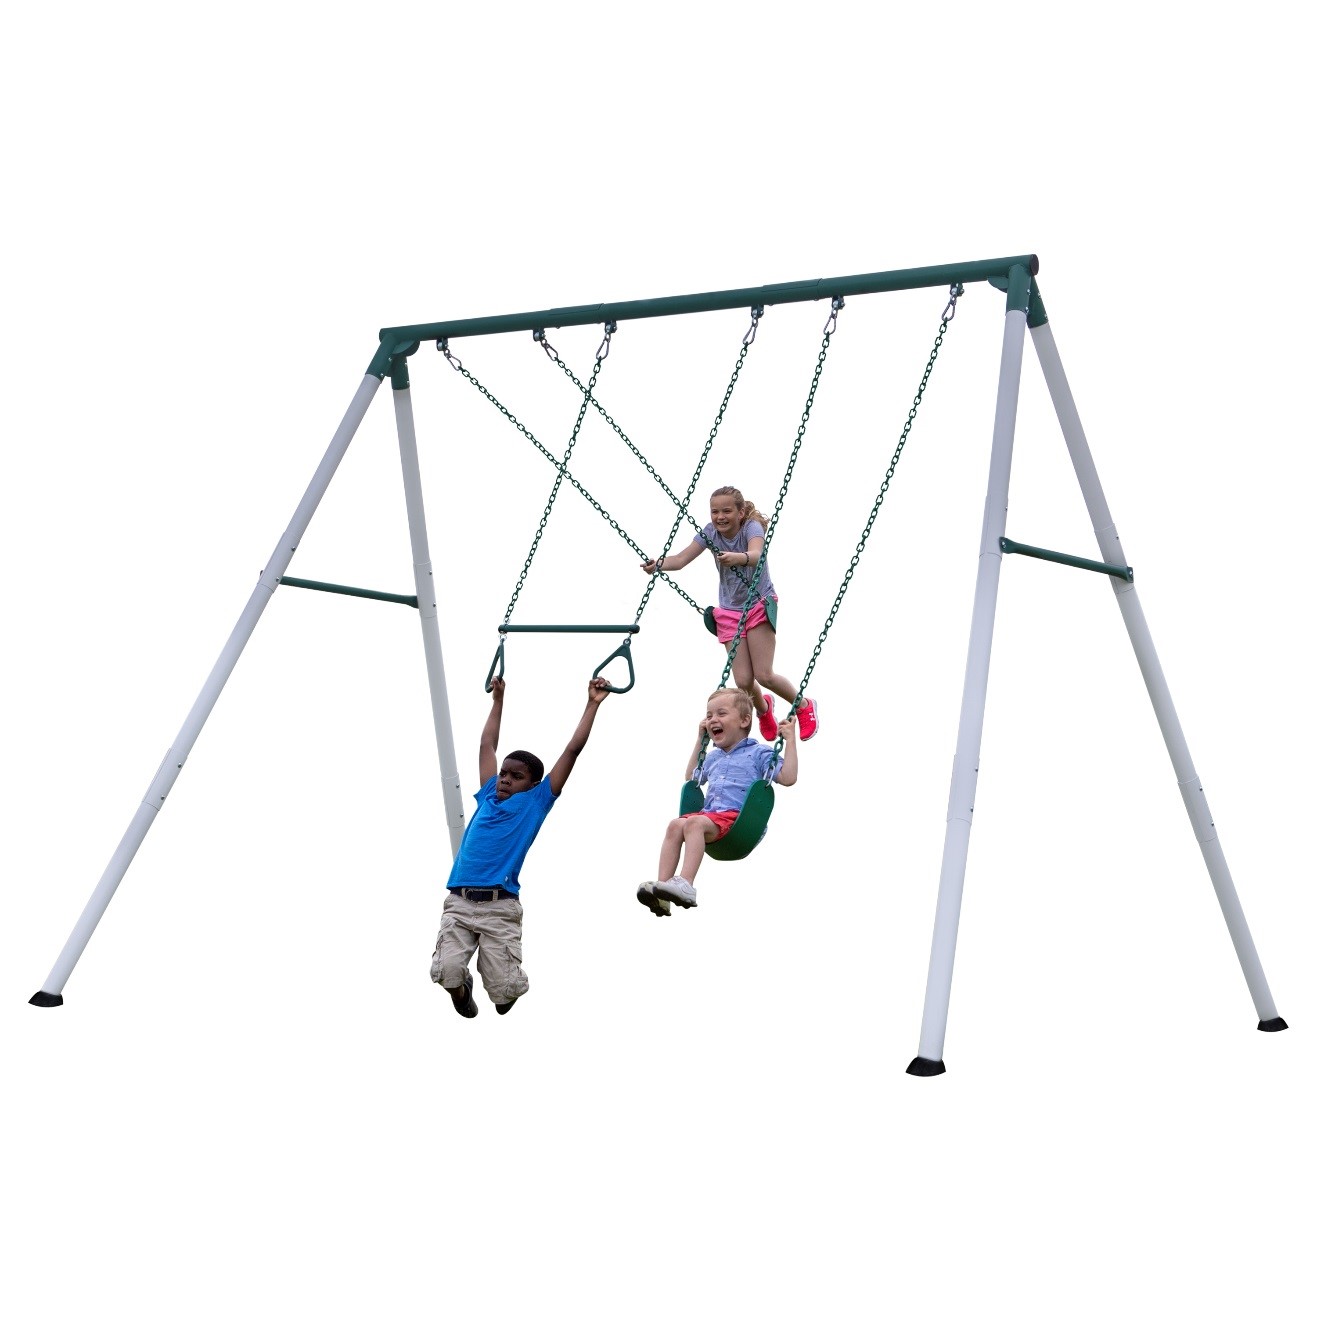 Backyard Discovery Big Brutus, Little Brutus and Mini Brutus metal A-frame swing sets